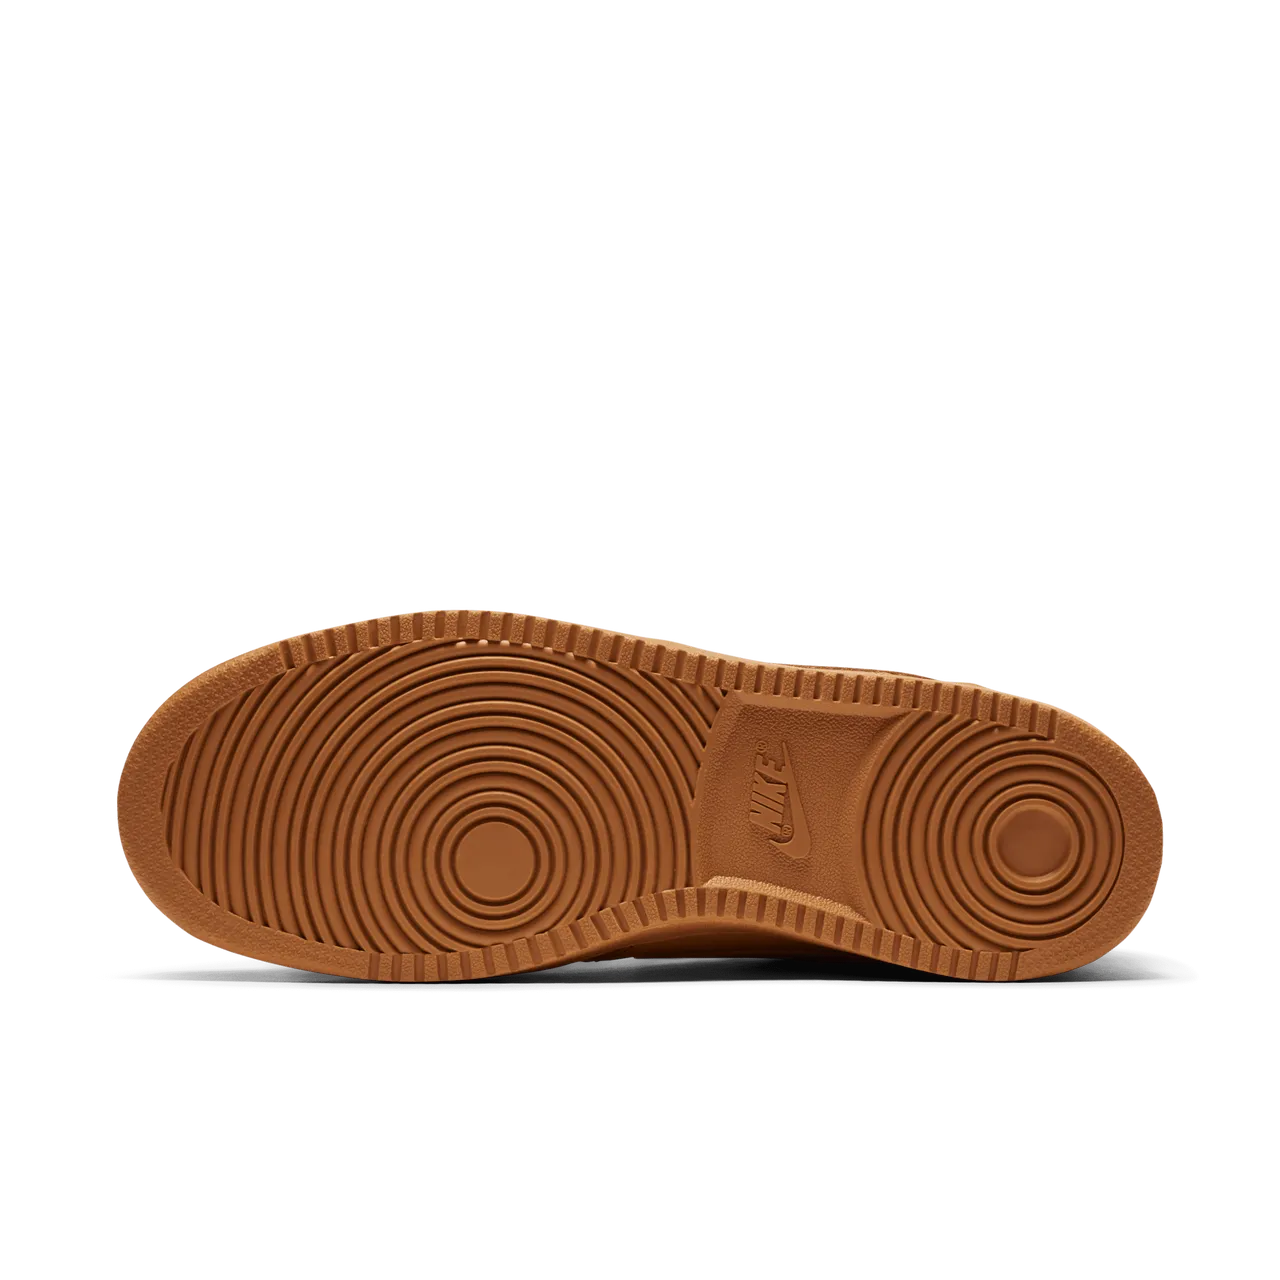 Nike Court Vision Low Shoes - Brown